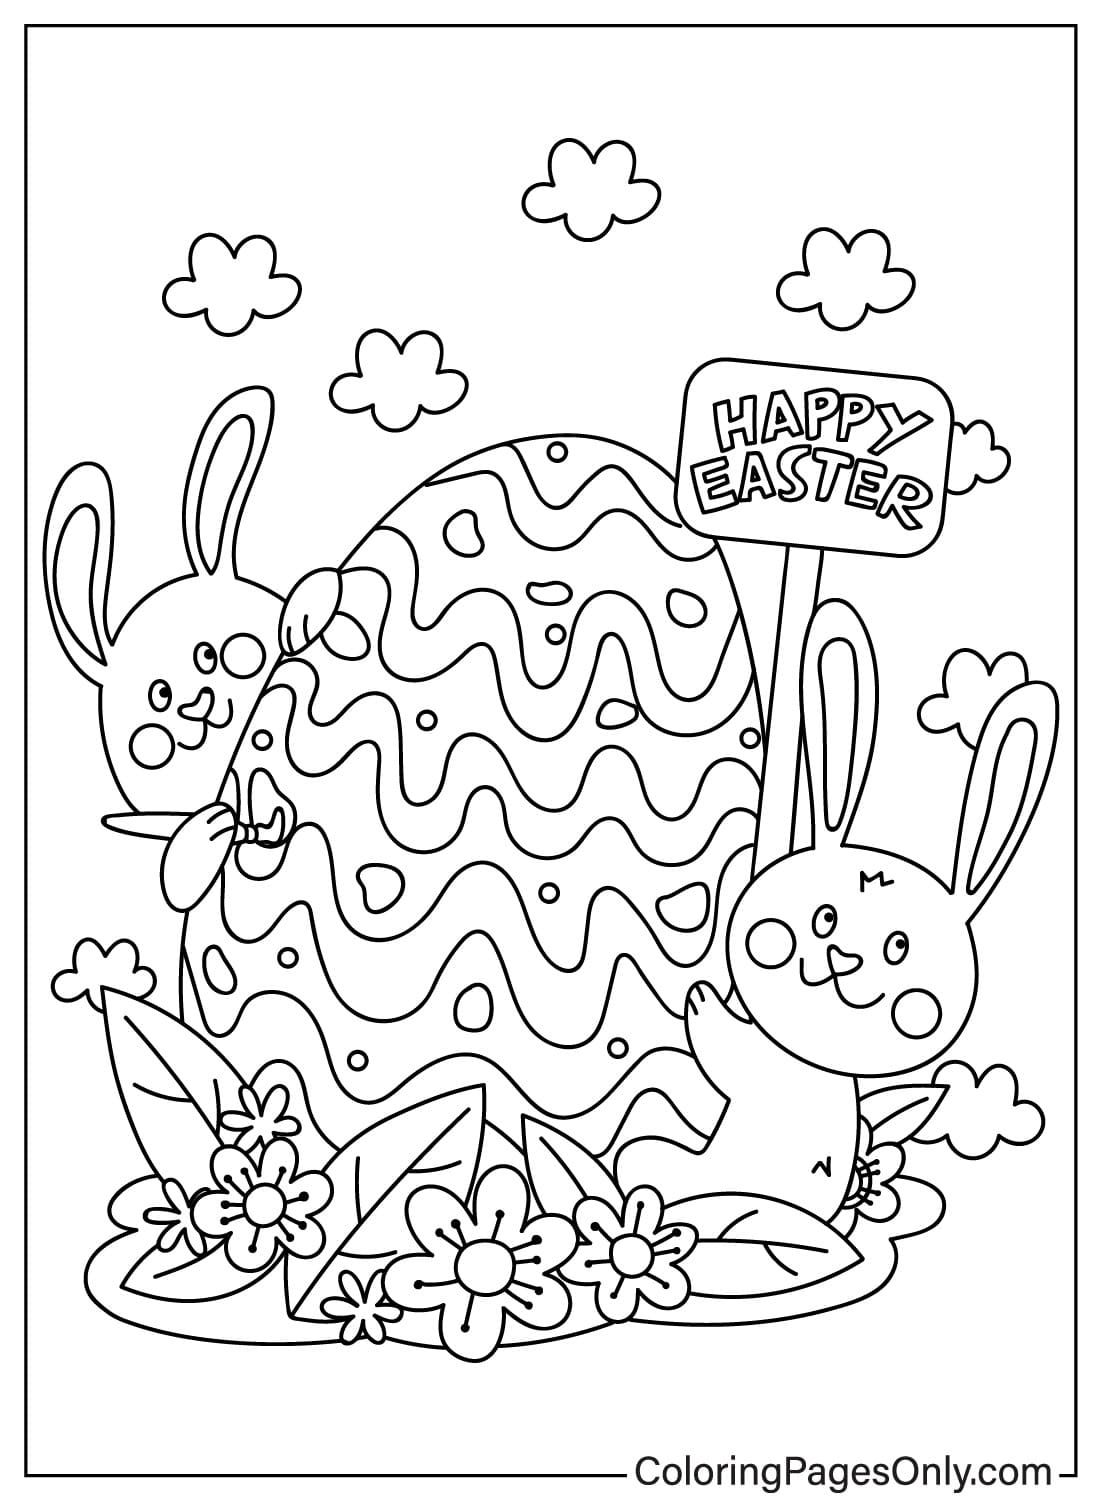 Drawing Easter Bunny Coloring Page from Easter Bunny